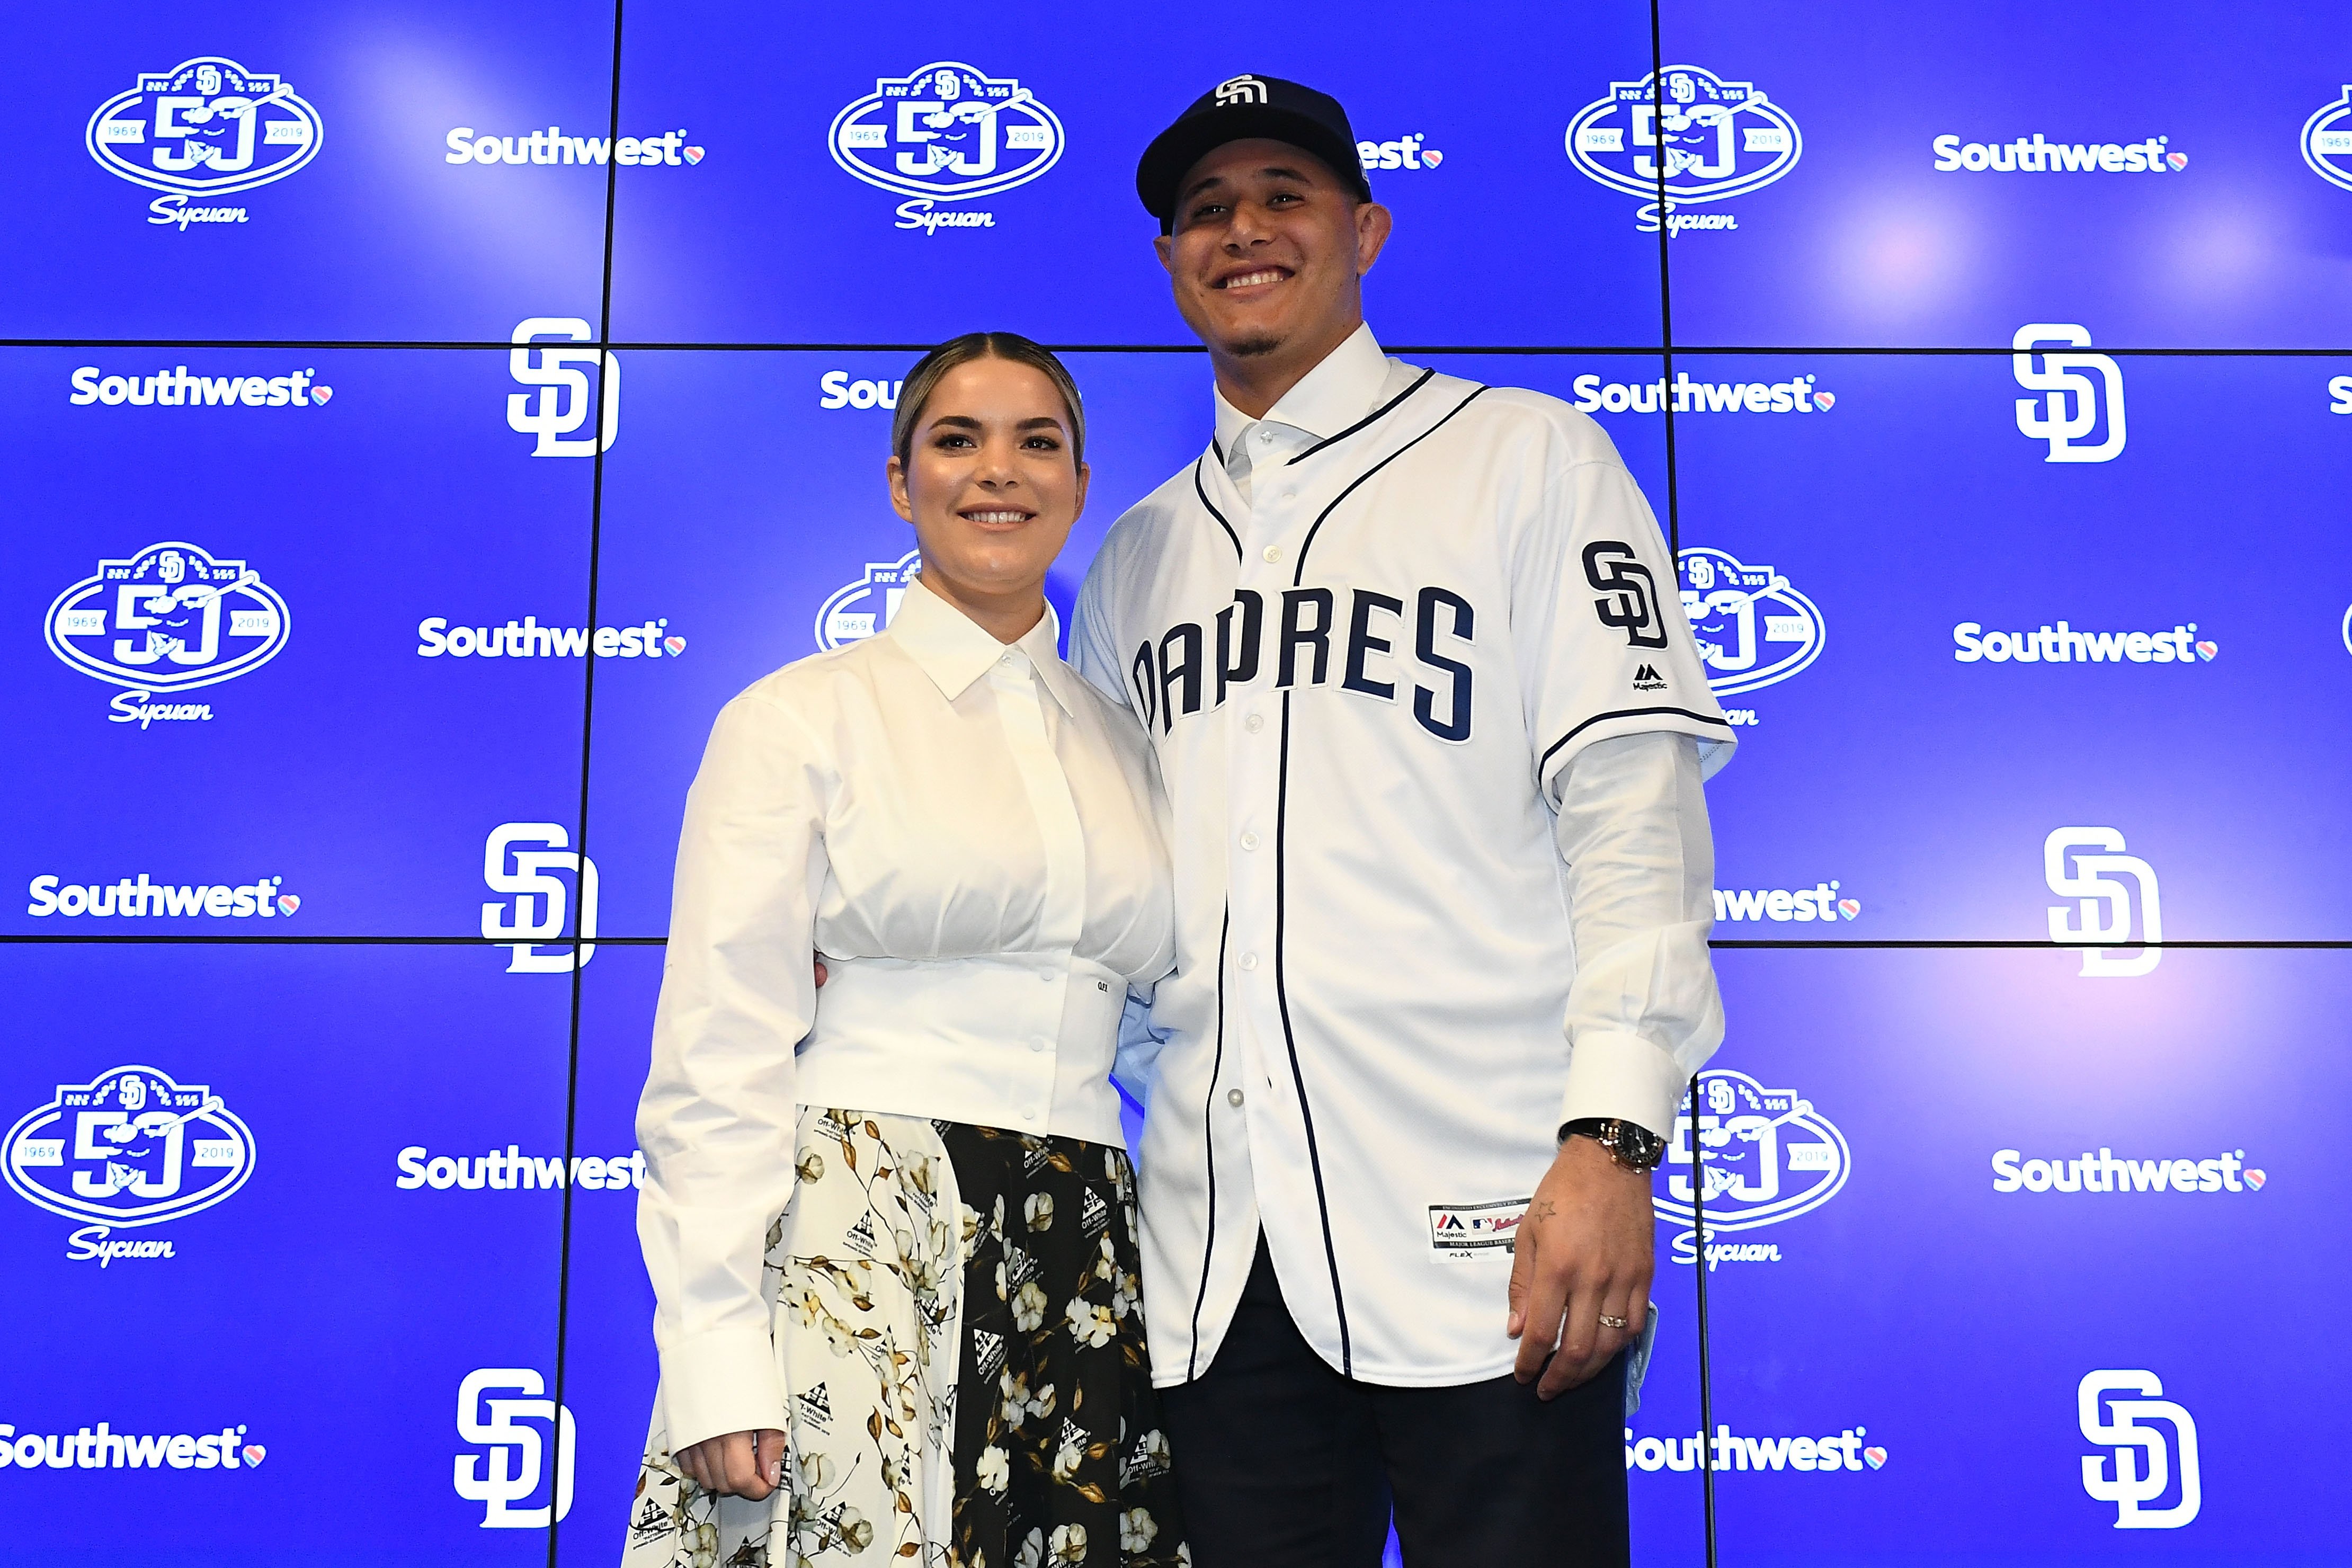 Manny Machado and his wife Yainee Alonso pose for a photo at Peoria Stadium on February 22, 2019, in Peoria, Arizona. | Source: Getty Images